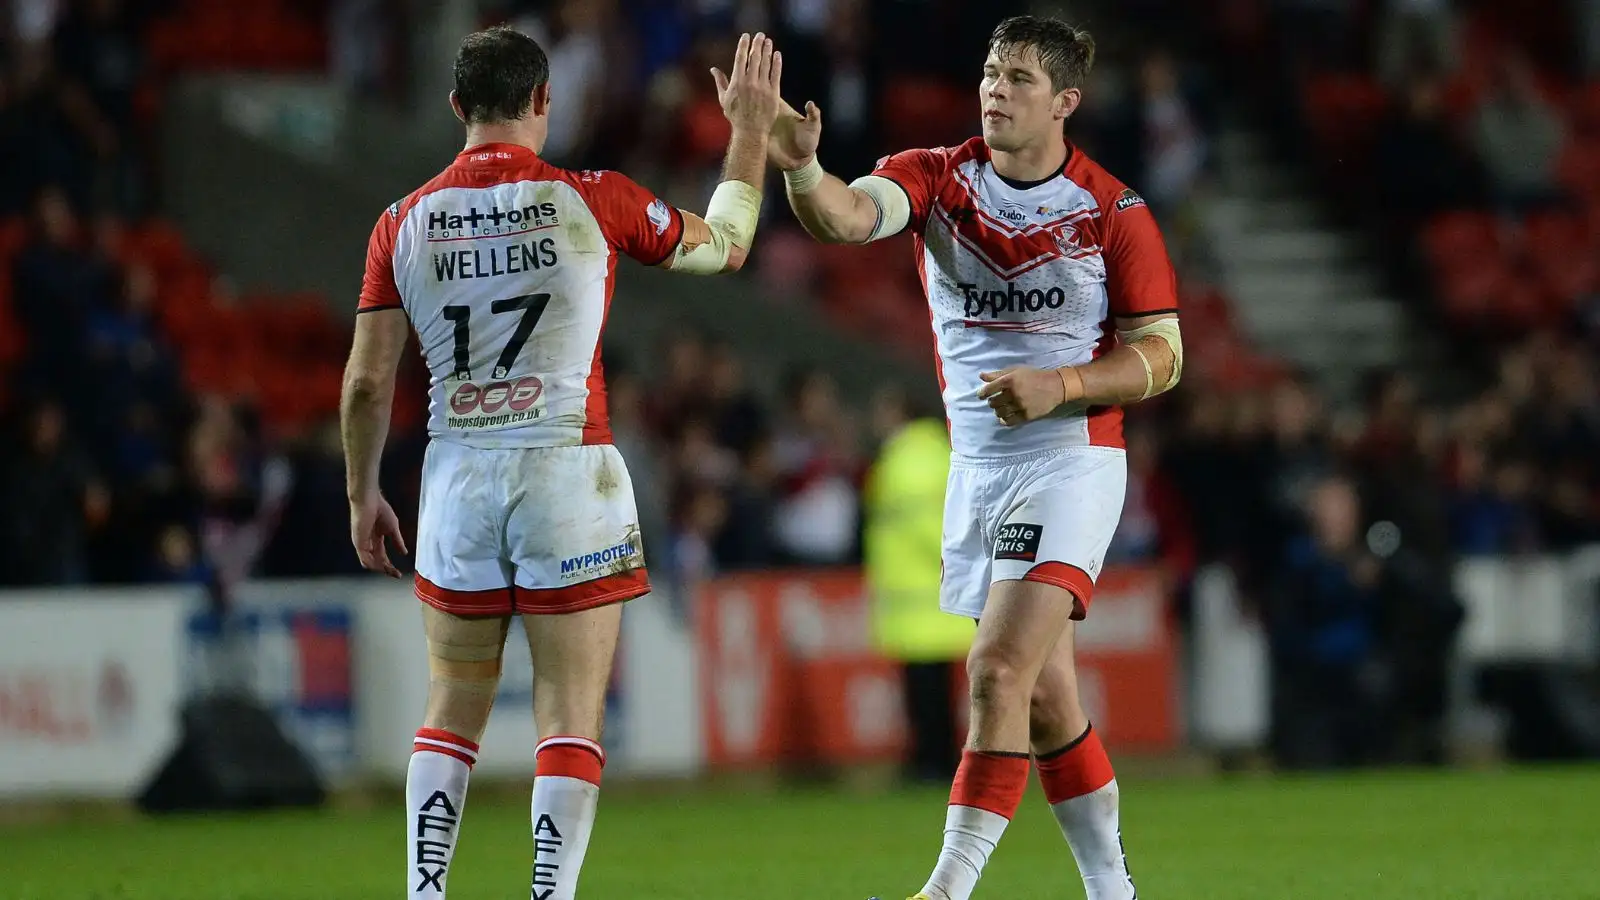 St Helens boss Paul Wellens pays tribute to retiring stalwart and former teammate Louie McCarthy-Scarsbrook: ‘He’s going to be really difficult to replace’